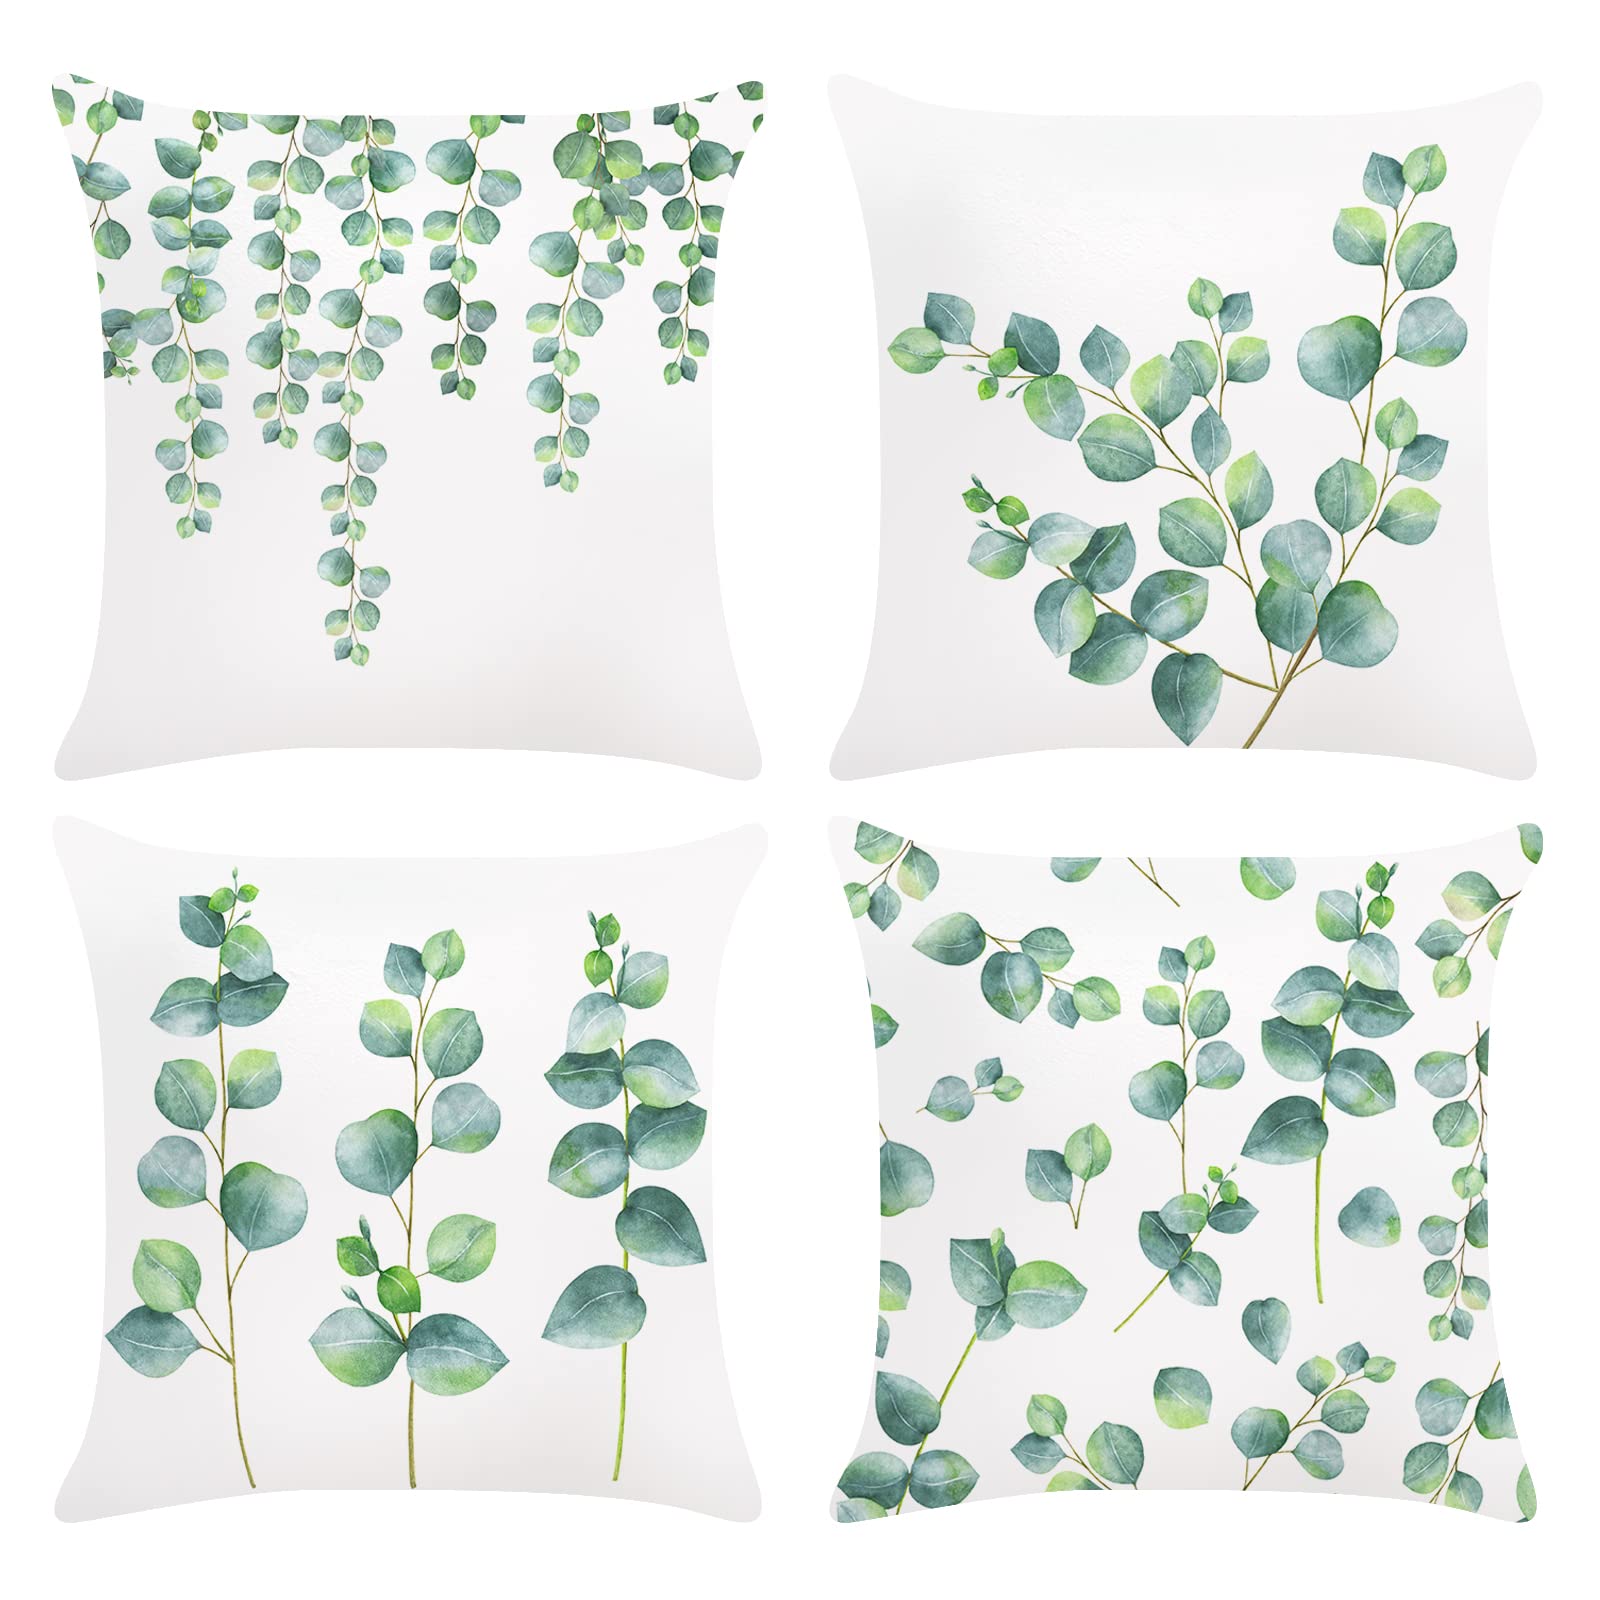 Bonhause Eucalyptus Leaves Cushion Covers 18 x 18 Inch Set of 4 Green Plants Decorative Throw Pillow Covers Soft Velvet Pillowcases for Sofa Couch Car Bedroom Home Decor, 45 x 45 cm